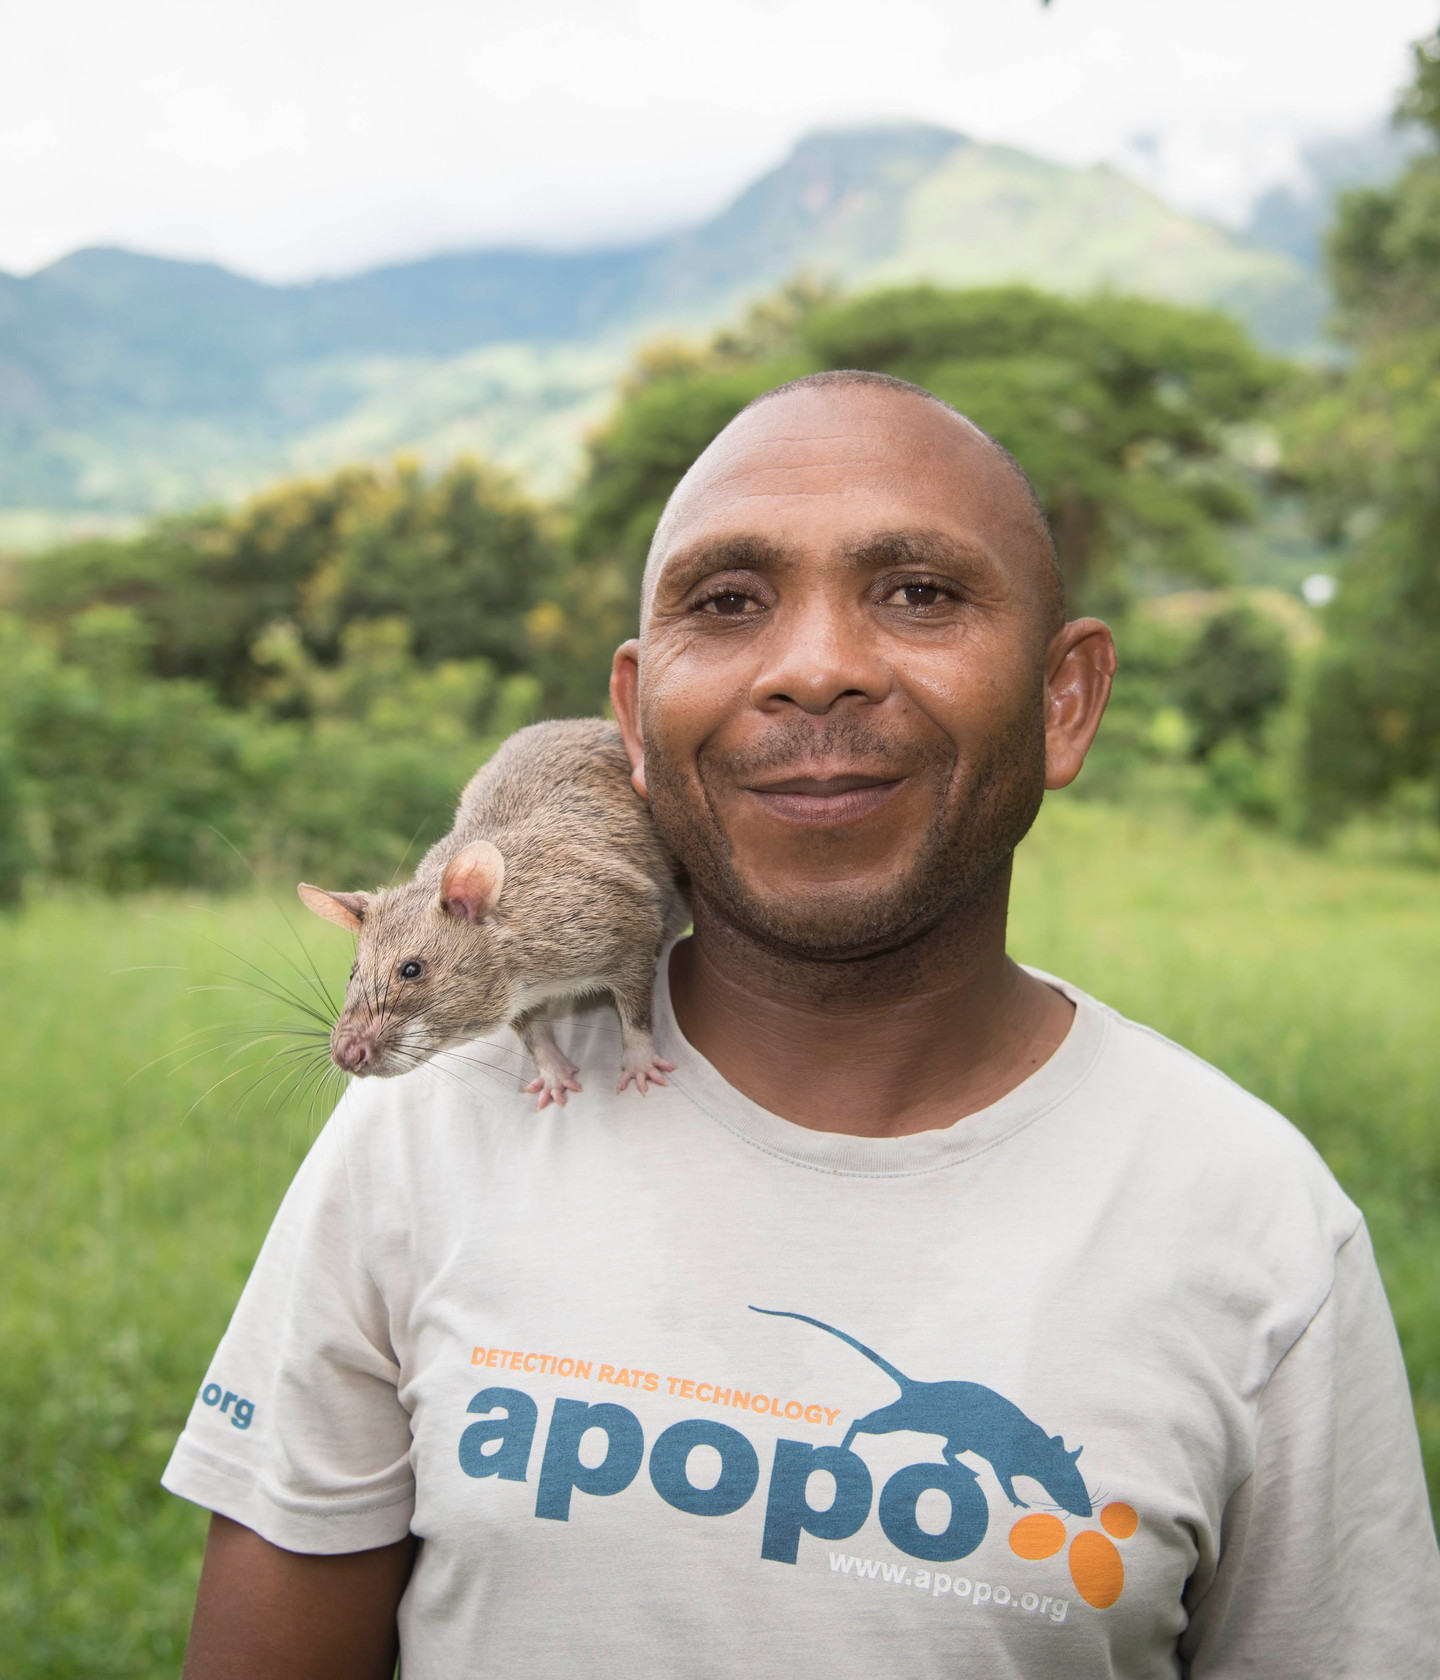 Just a youngster, Shuri recently graduated from APOPO mine detection training with flying colors. With a flash of her whiskers, Shuri will help sniff out landmines in Angola one of the most mine-affected places in the world.